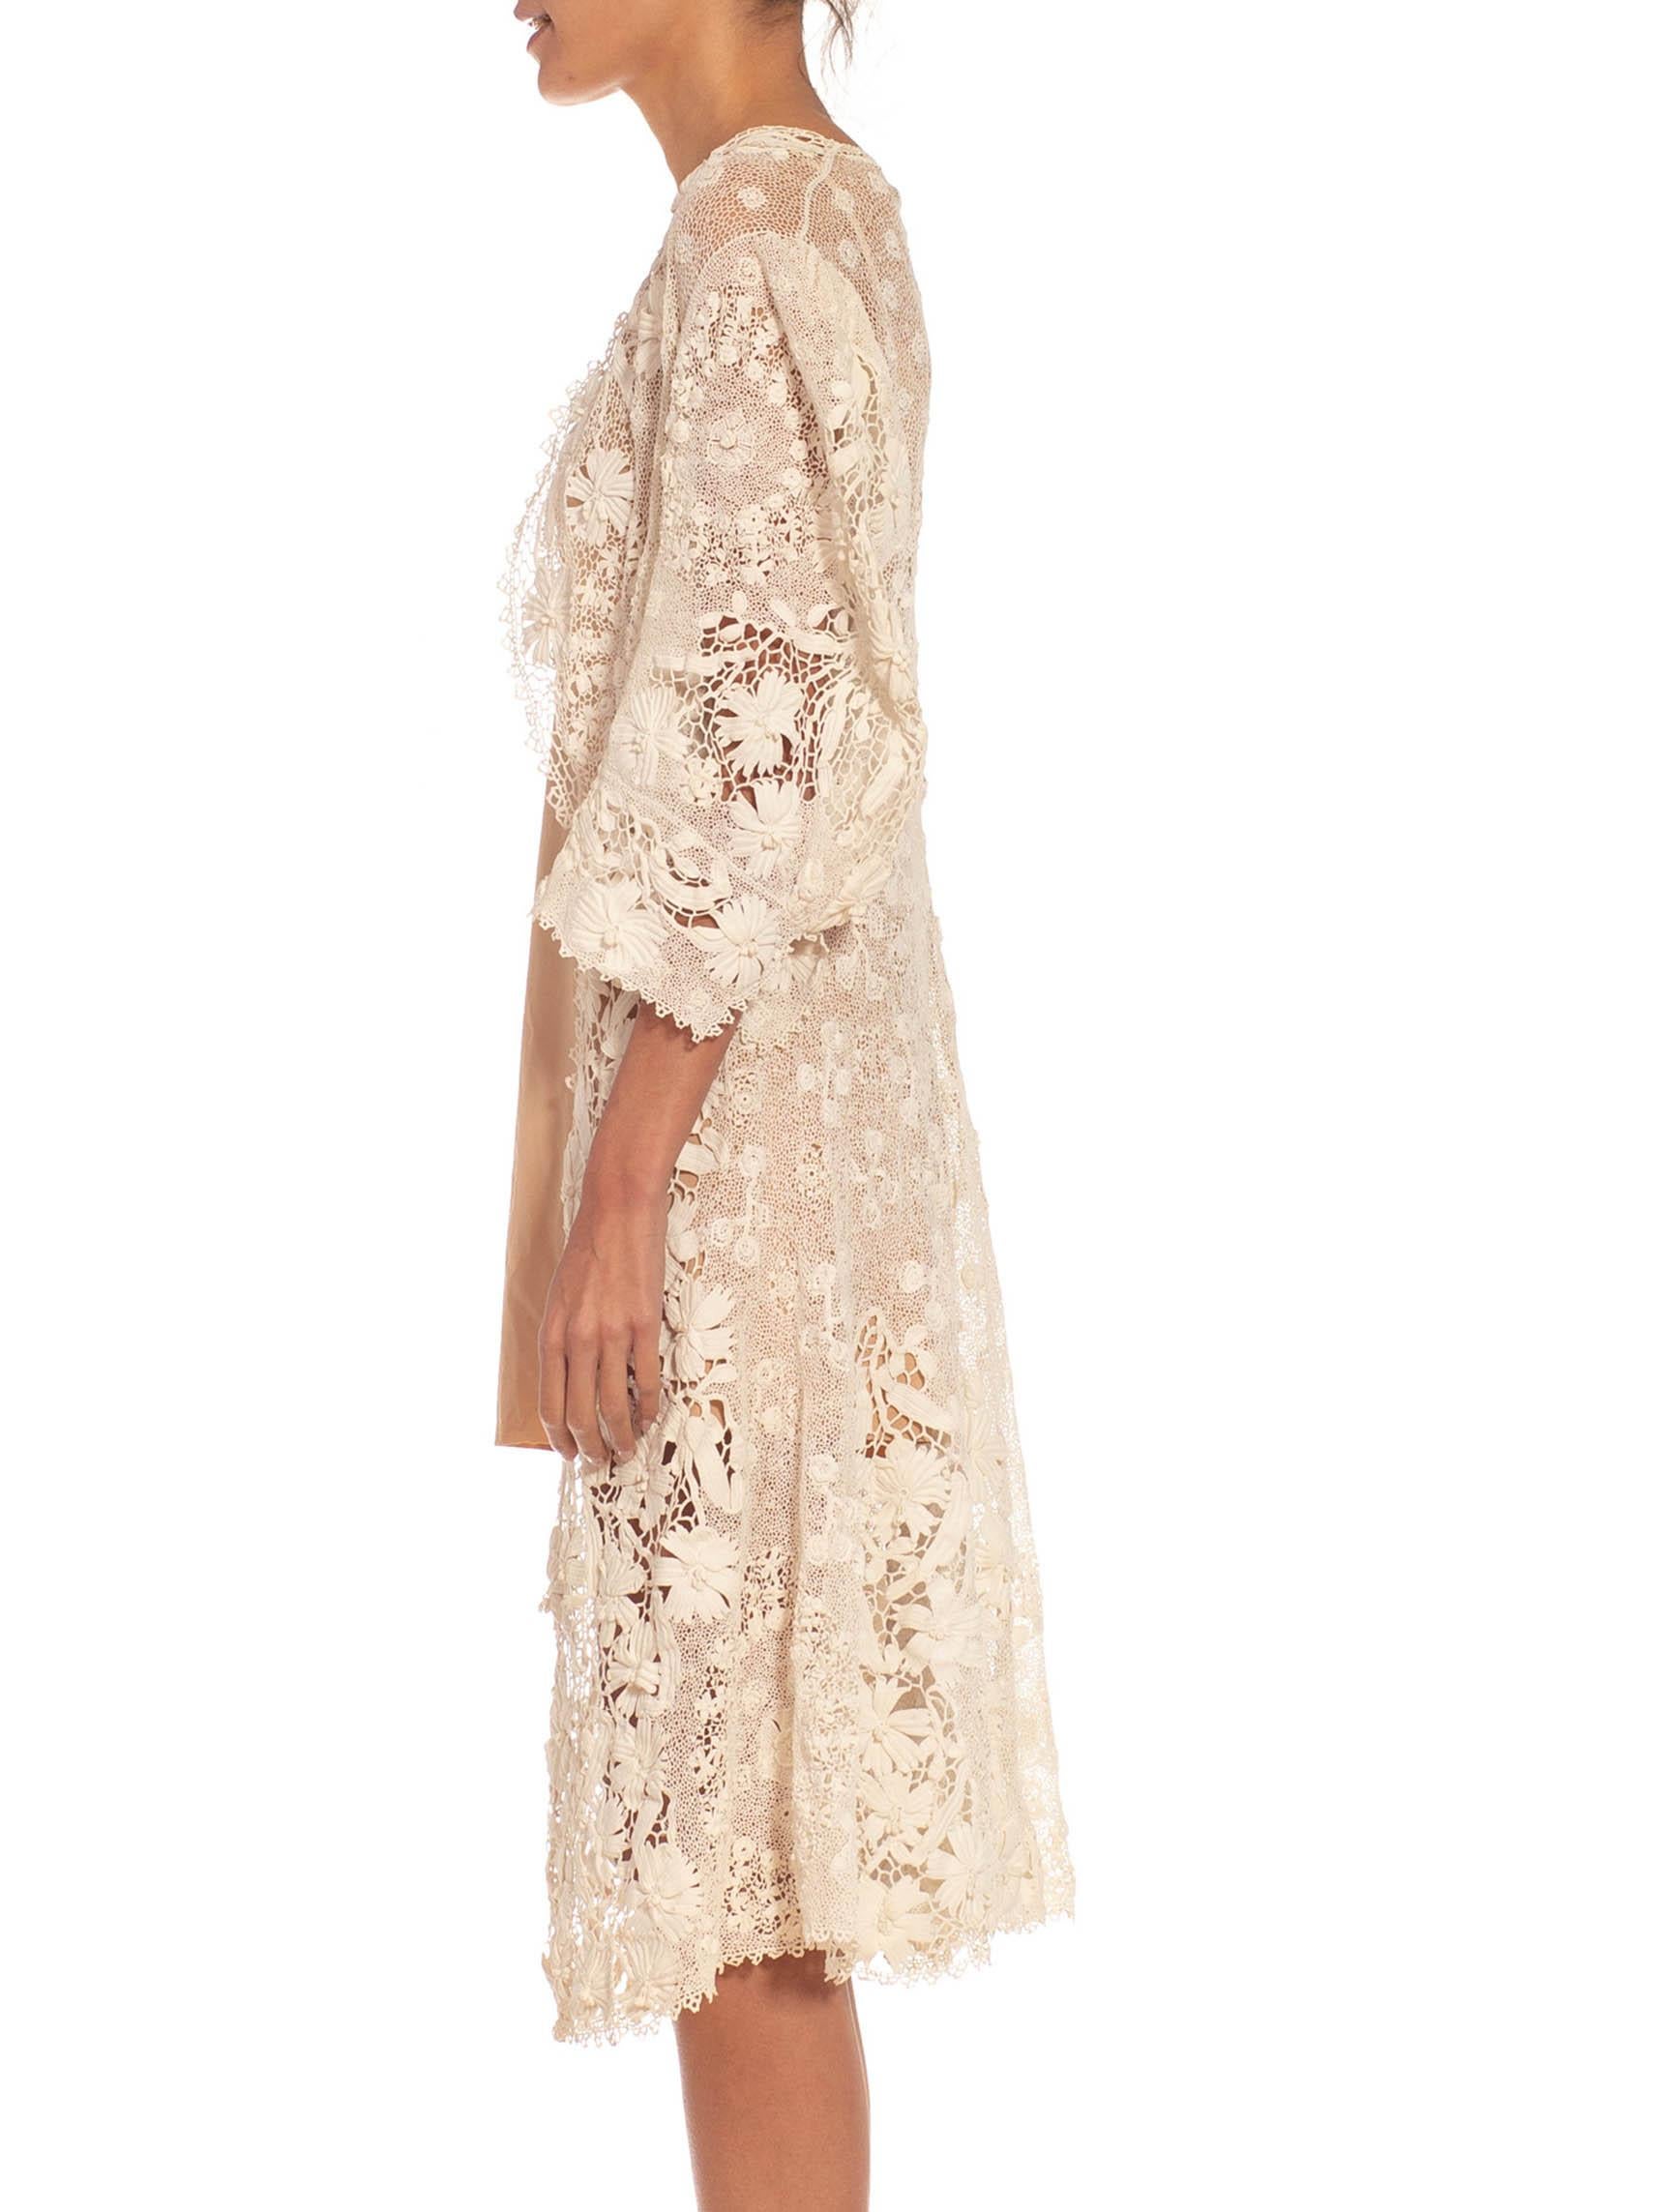 Victorian White Irish Crochet Hand Made Lace Long Jacket In Excellent Condition For Sale In New York, NY